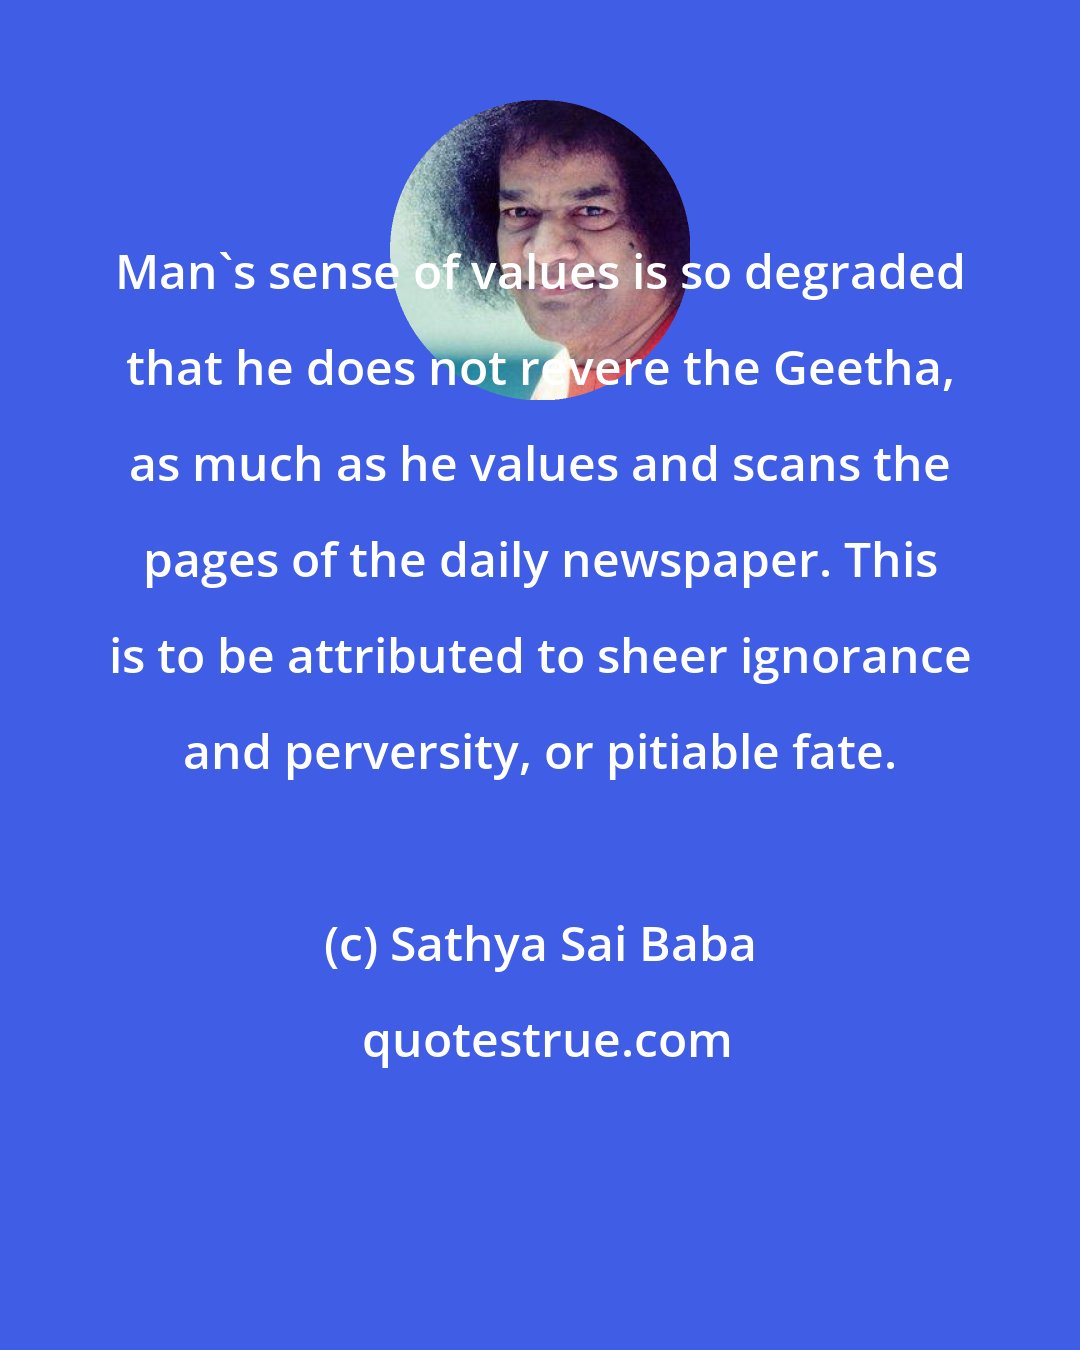 Sathya Sai Baba: Man's sense of values is so degraded that he does not revere the Geetha, as much as he values and scans the pages of the daily newspaper. This is to be attributed to sheer ignorance and perversity, or pitiable fate.